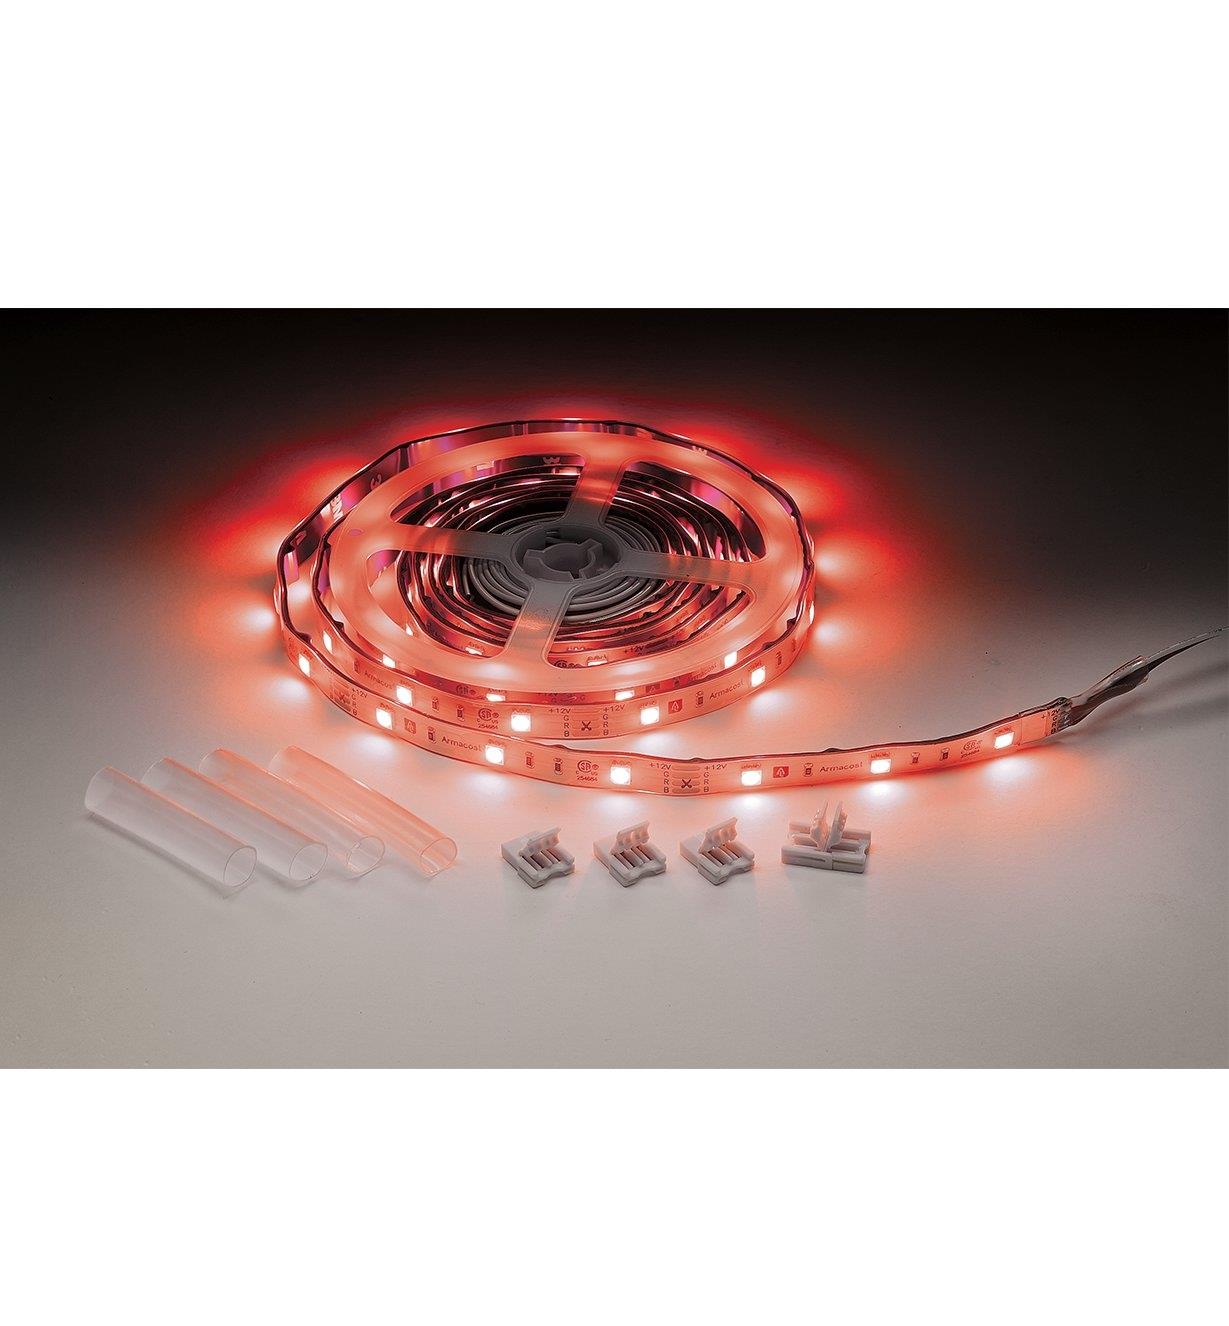 00U4513 - 8' (2.5m), Outdoor/Wet Location Color-Controlled 30 LEDs/m Kit